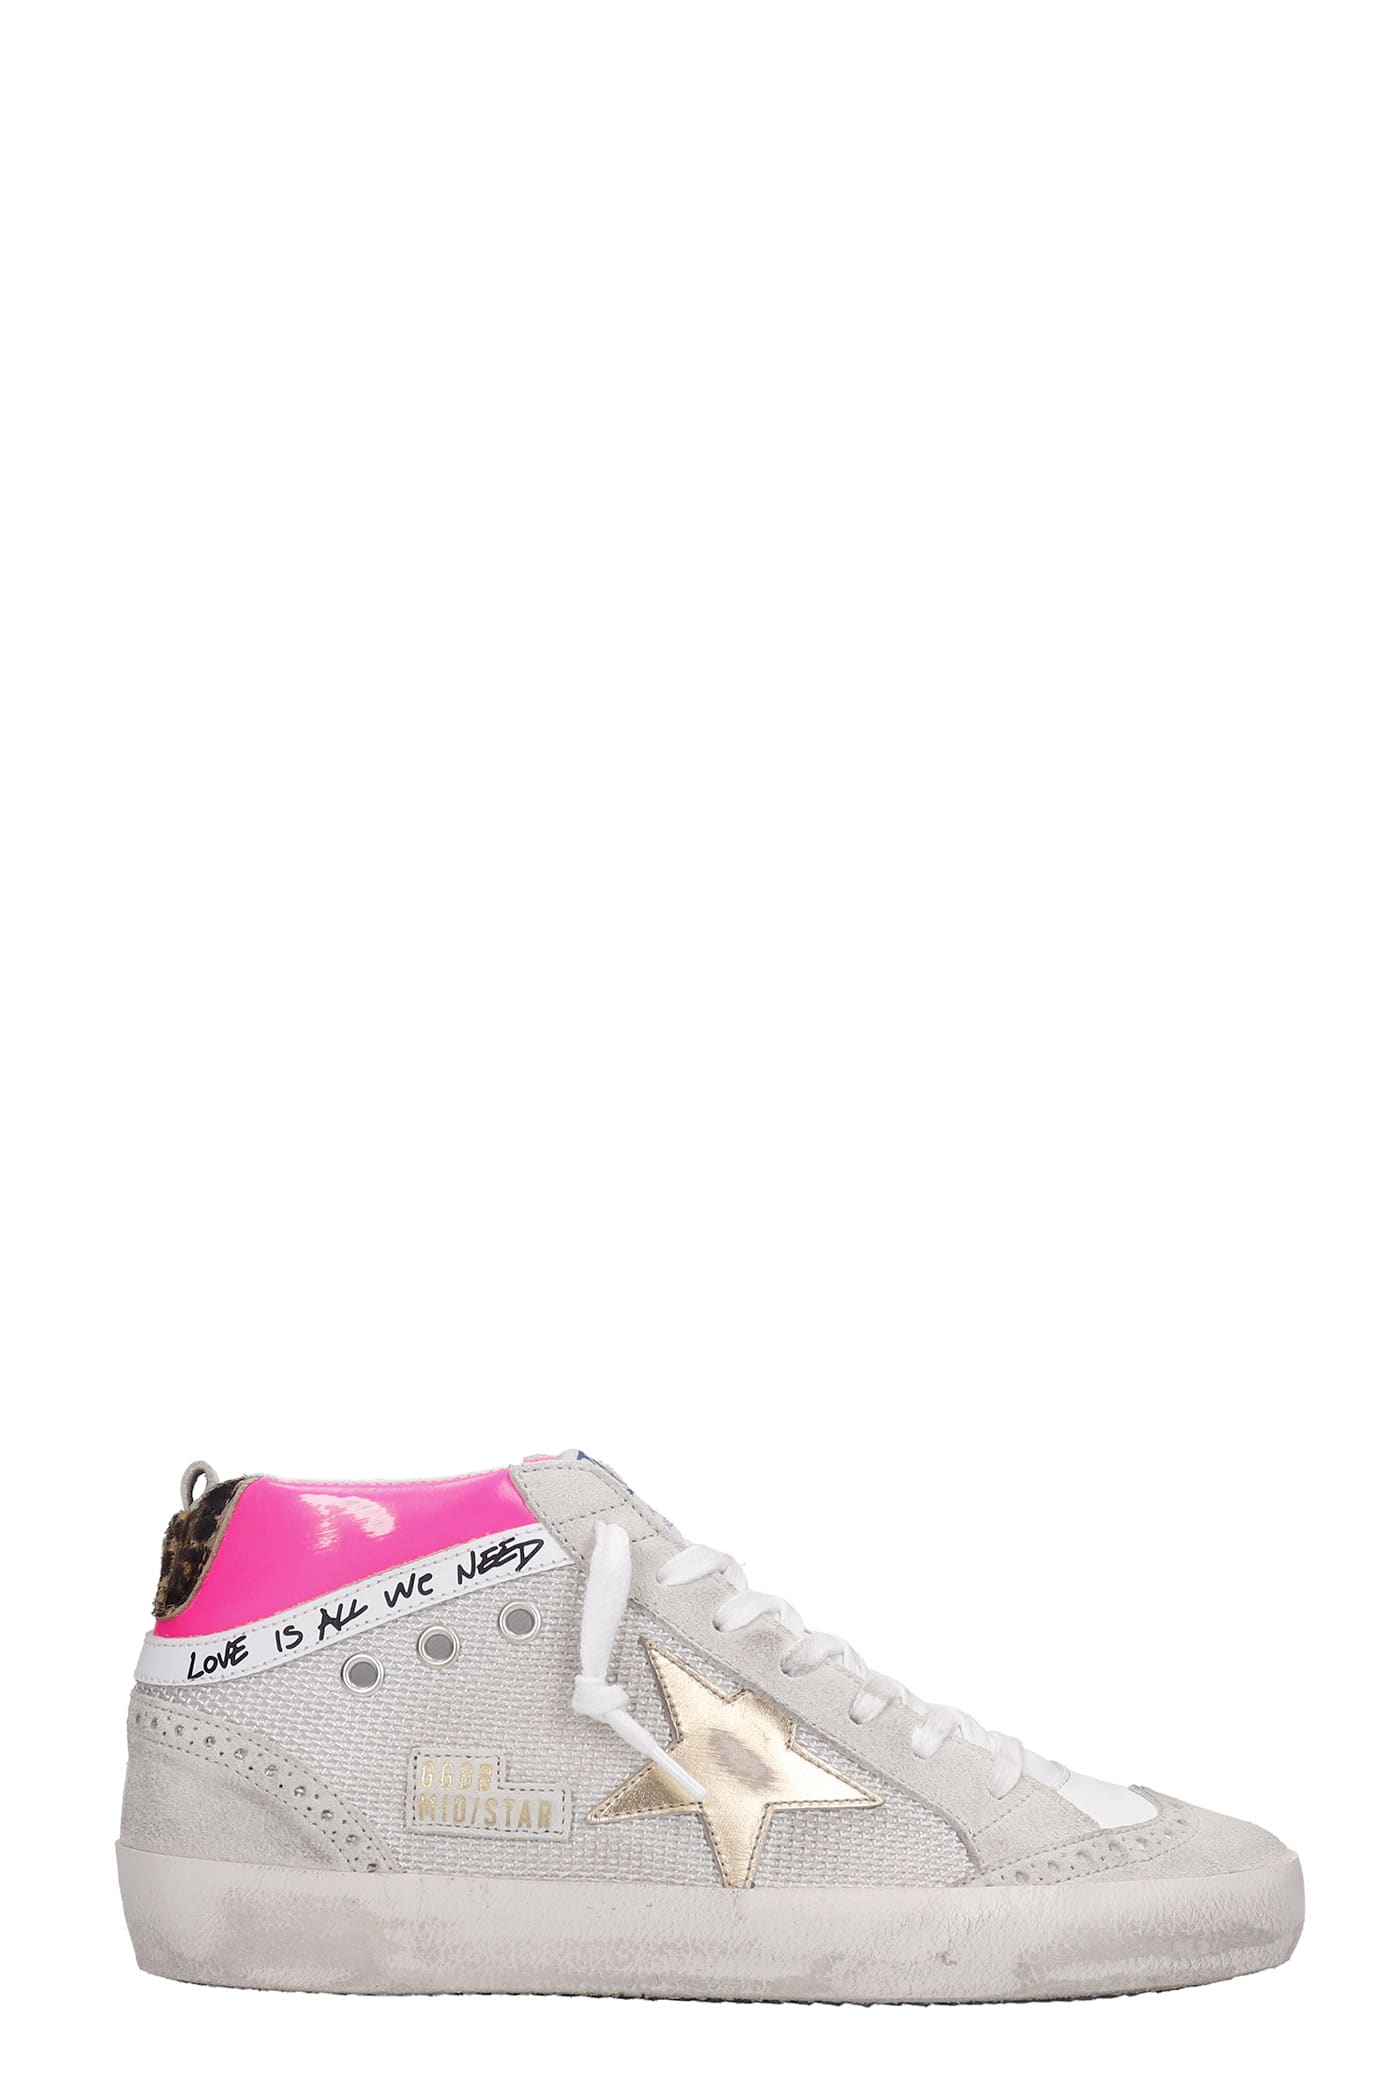 GOLDEN GOOSE MID STAR SNEAKERS IN GREY SUEDE,GWF00123F00105680807